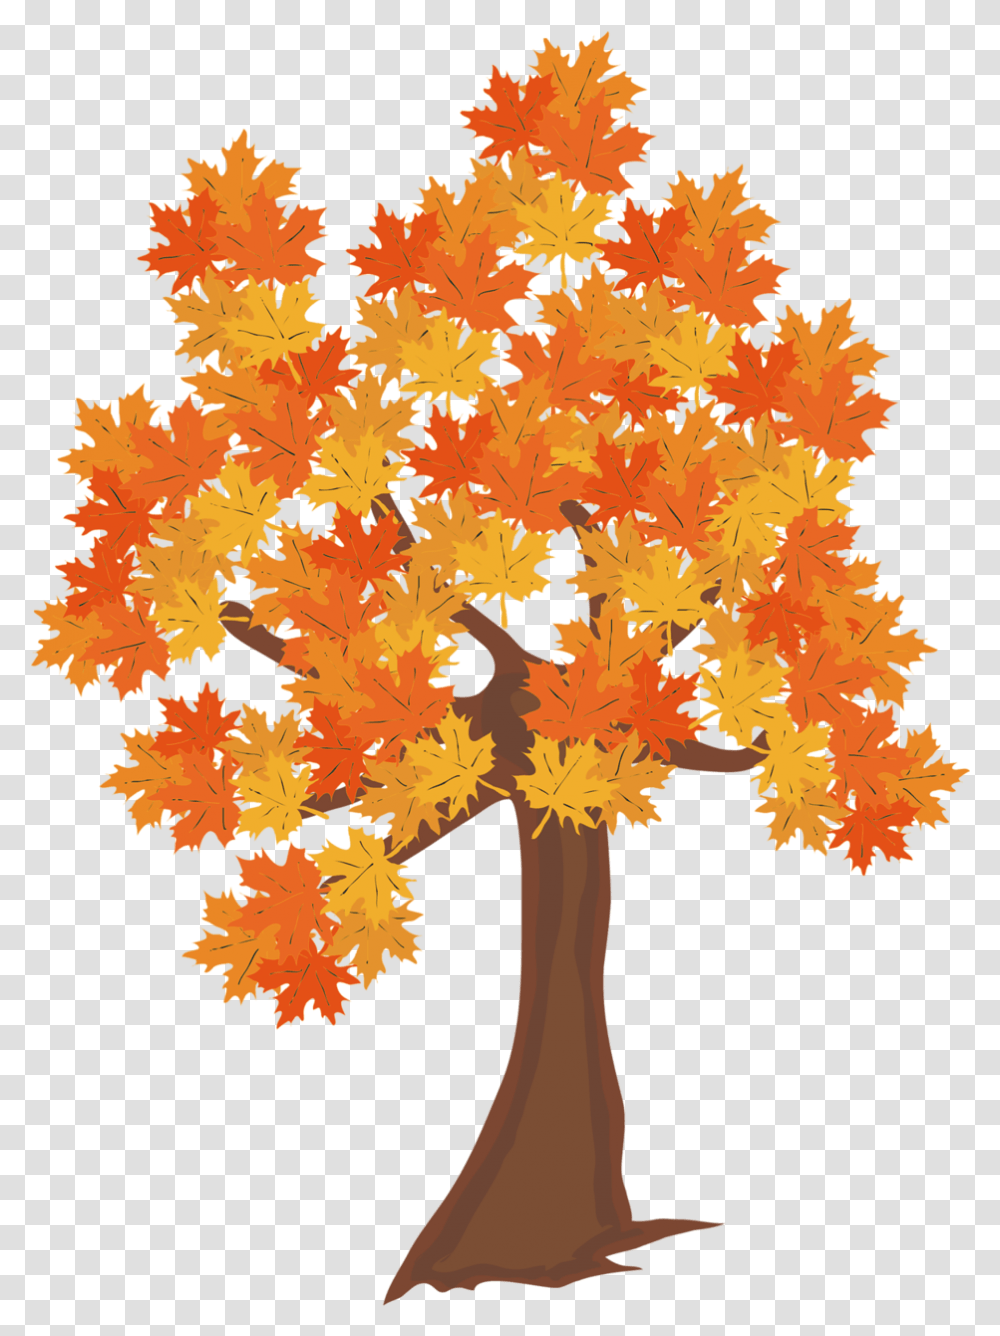 Fall Leaves Falling From A Tree Arbol De, Leaf, Plant, Maple, Maple Leaf Transparent Png